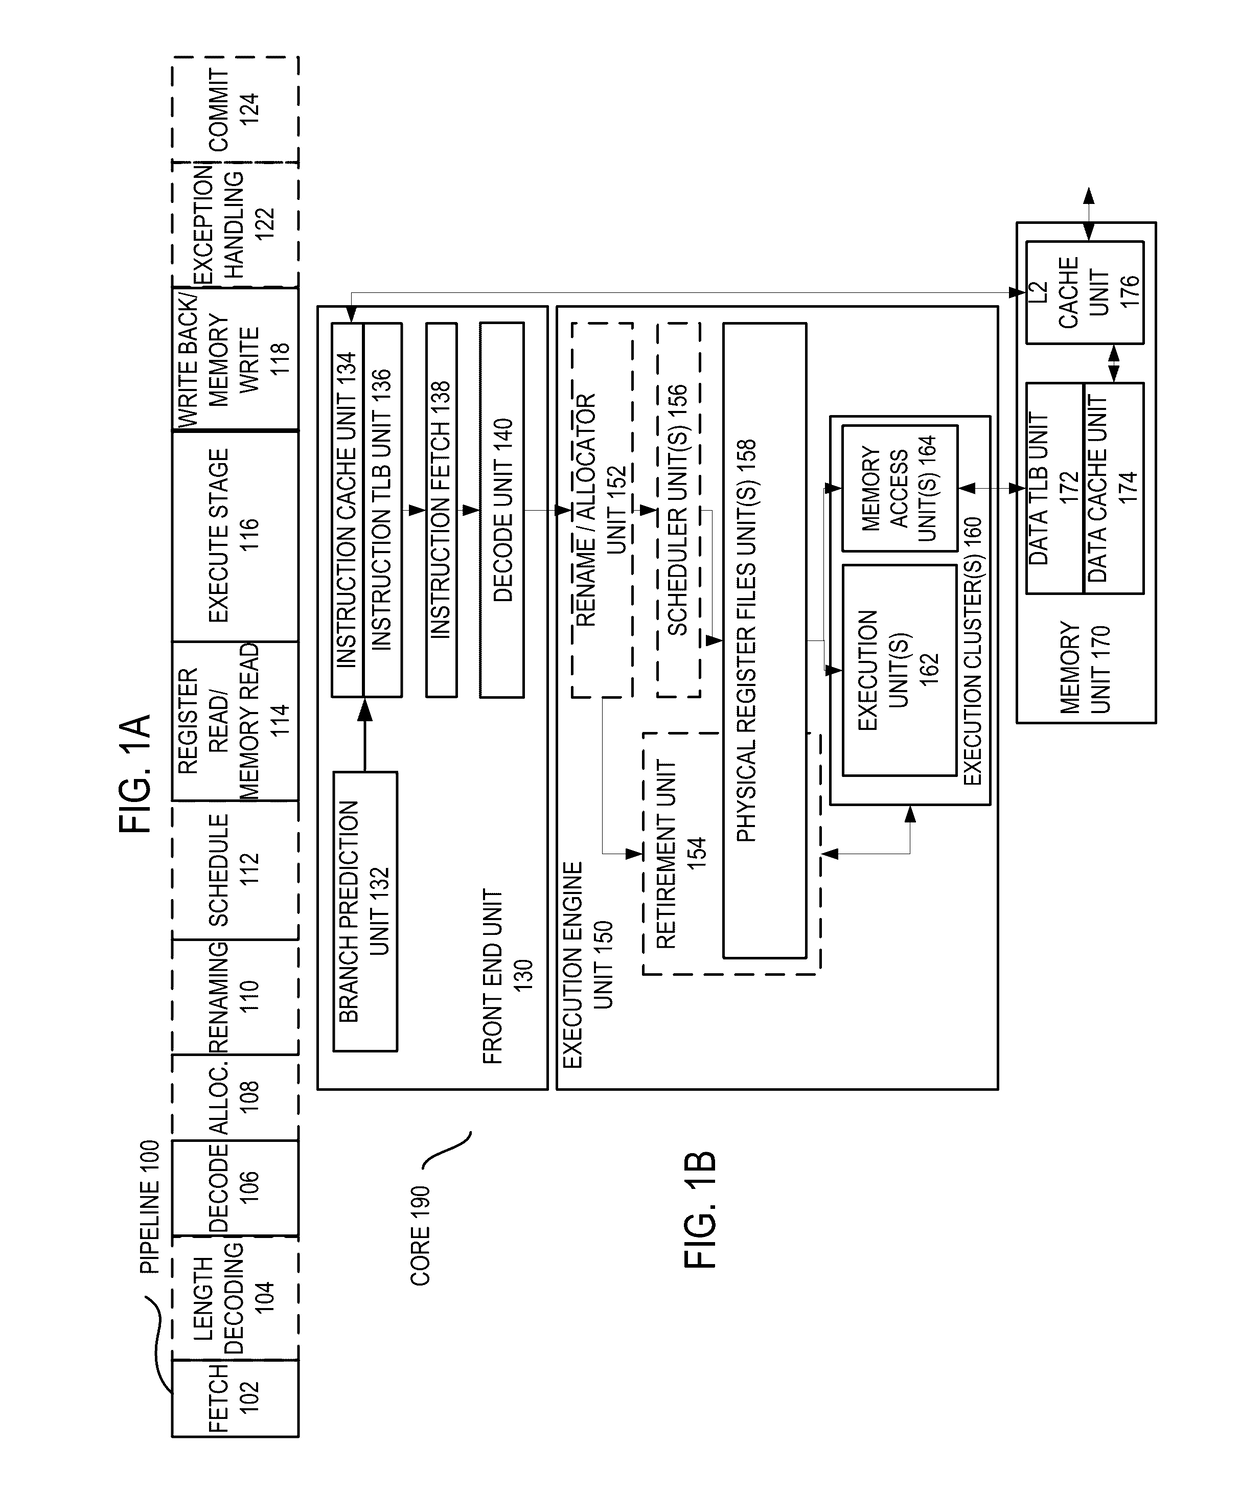 Method and apparatus for implementing a dynamic out-of-order processor pipeline